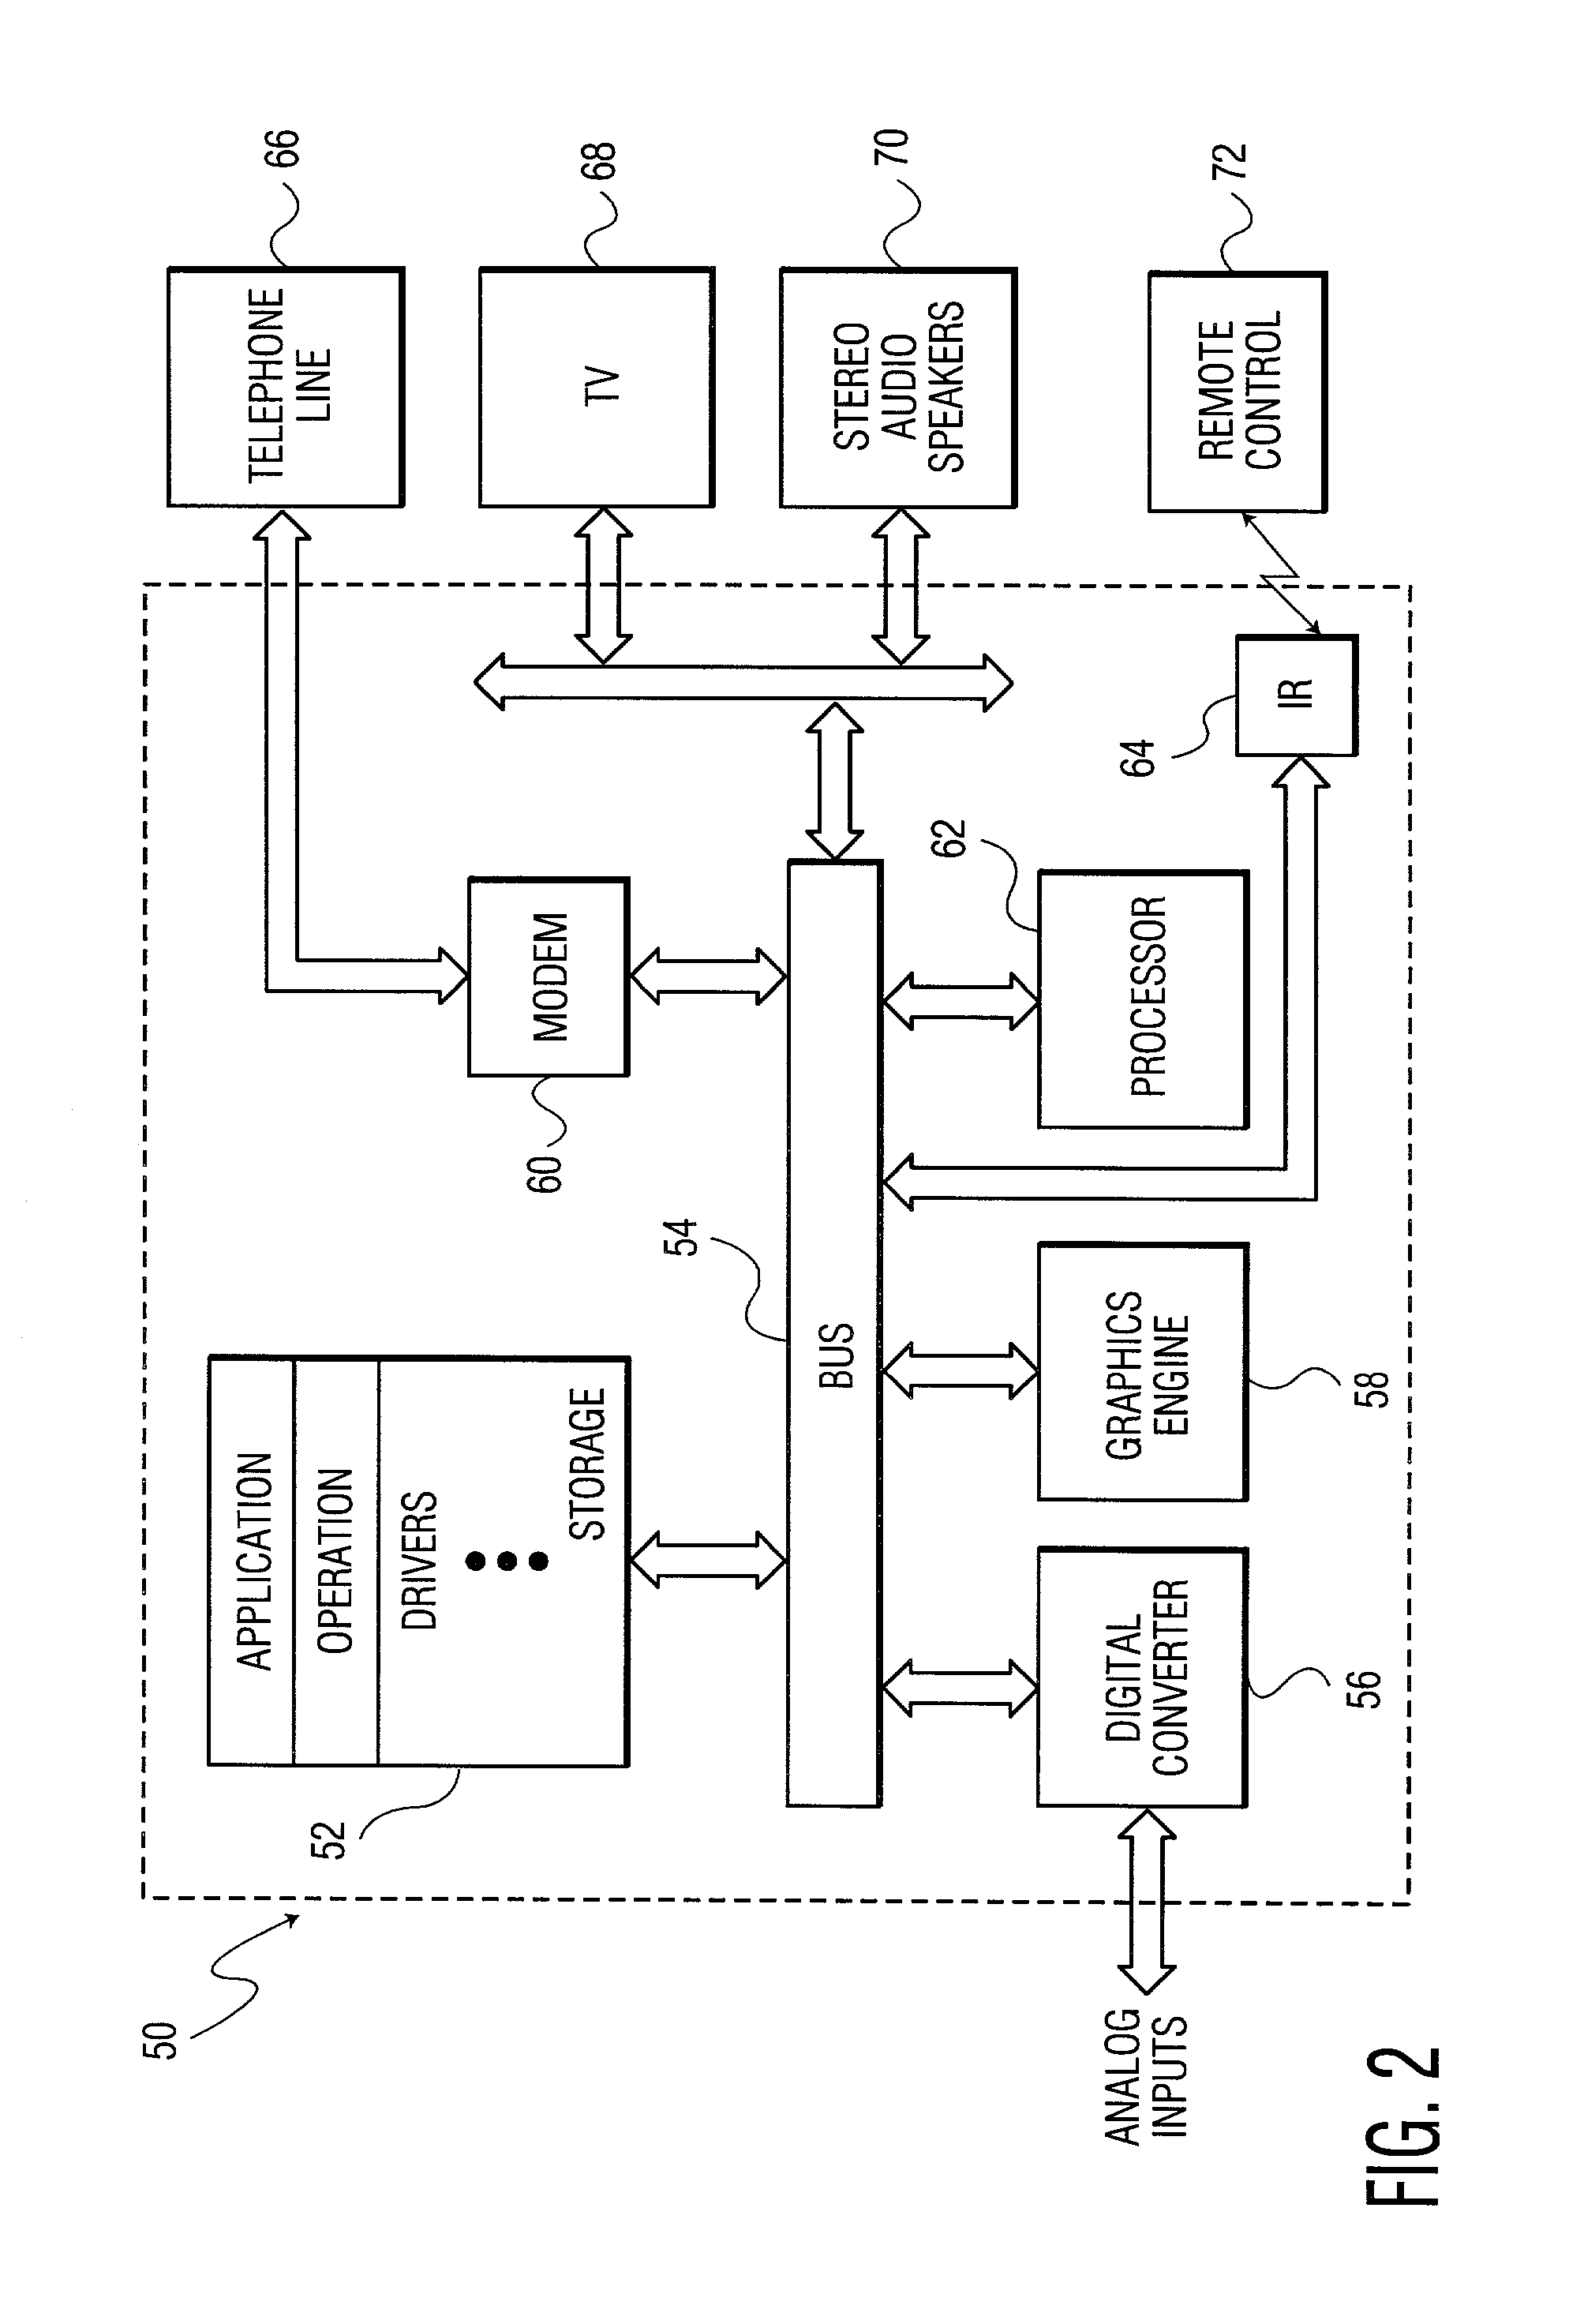 Method and apparatus for audio navigation of an information appliance